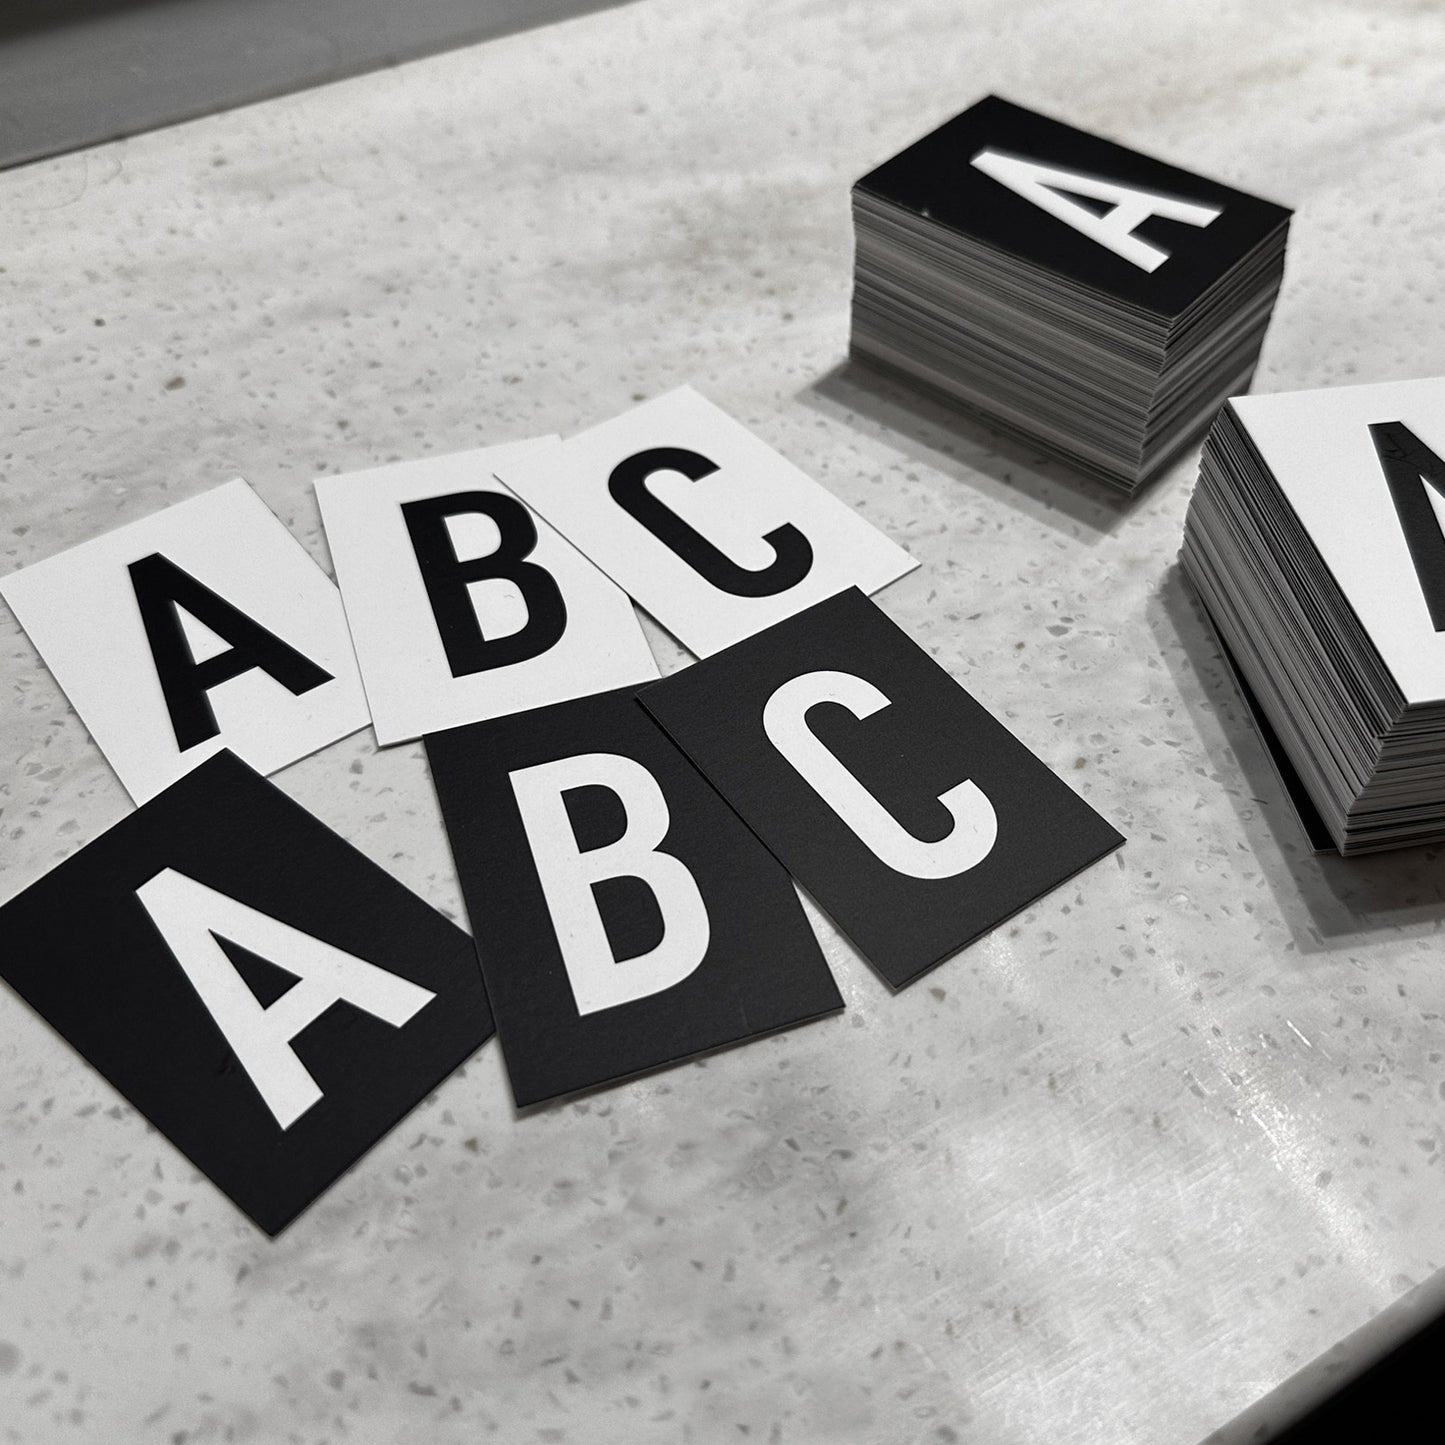 Replacement Alphabet Letter Packs for Menu Dispay Signs